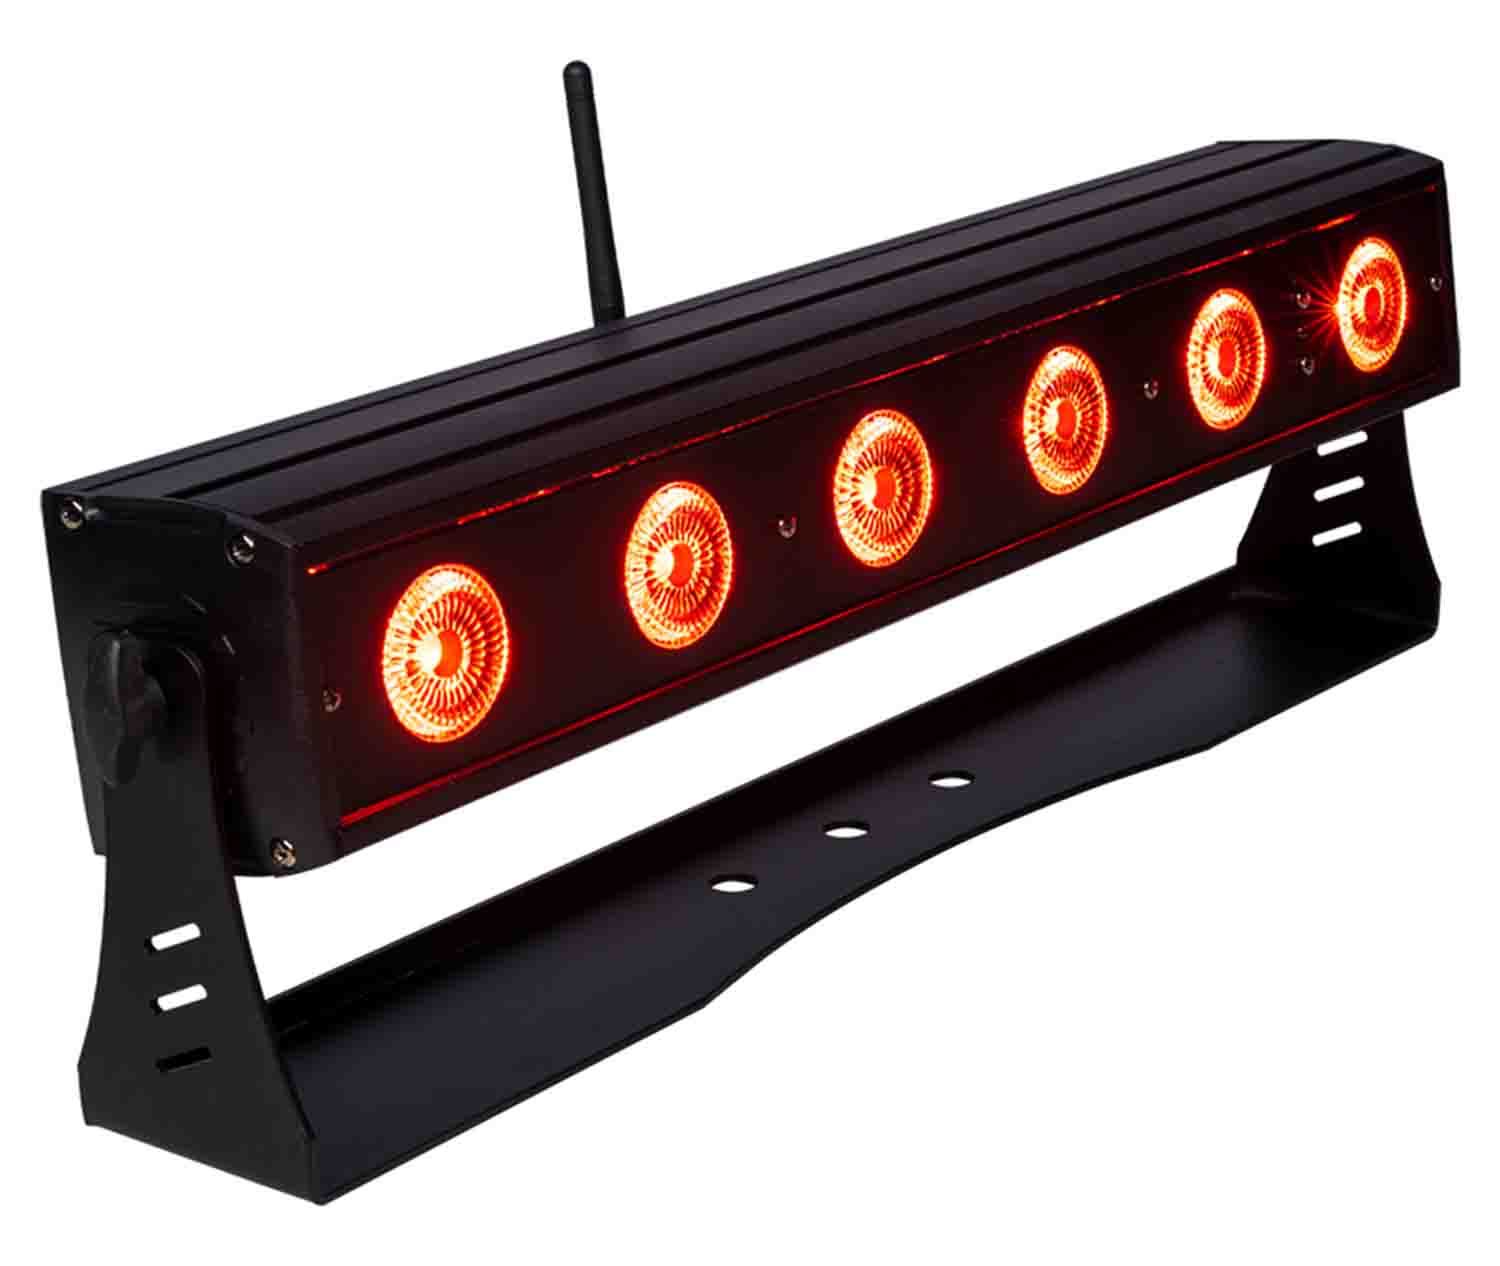 Colorkey CKU-7070 AirBar HEX 6 Wireless LED Bar with Rechargeable Battery - Hollywood DJ